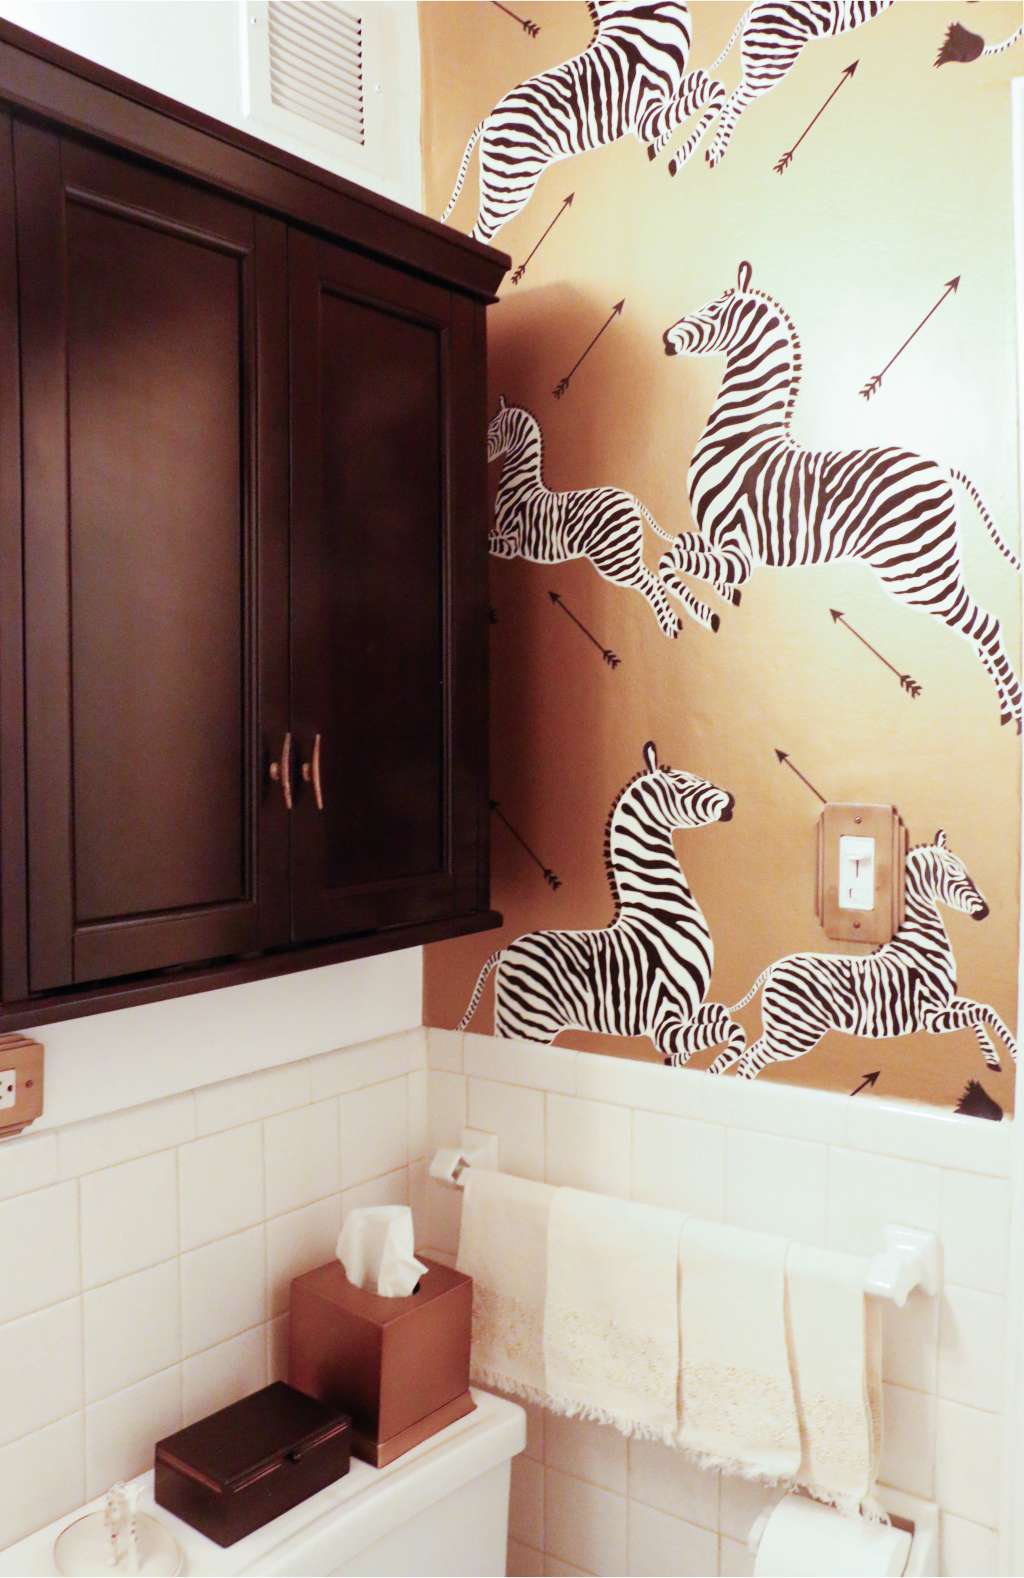 Wonderful Wallpaper in Small Spaces | Apartment Therapy